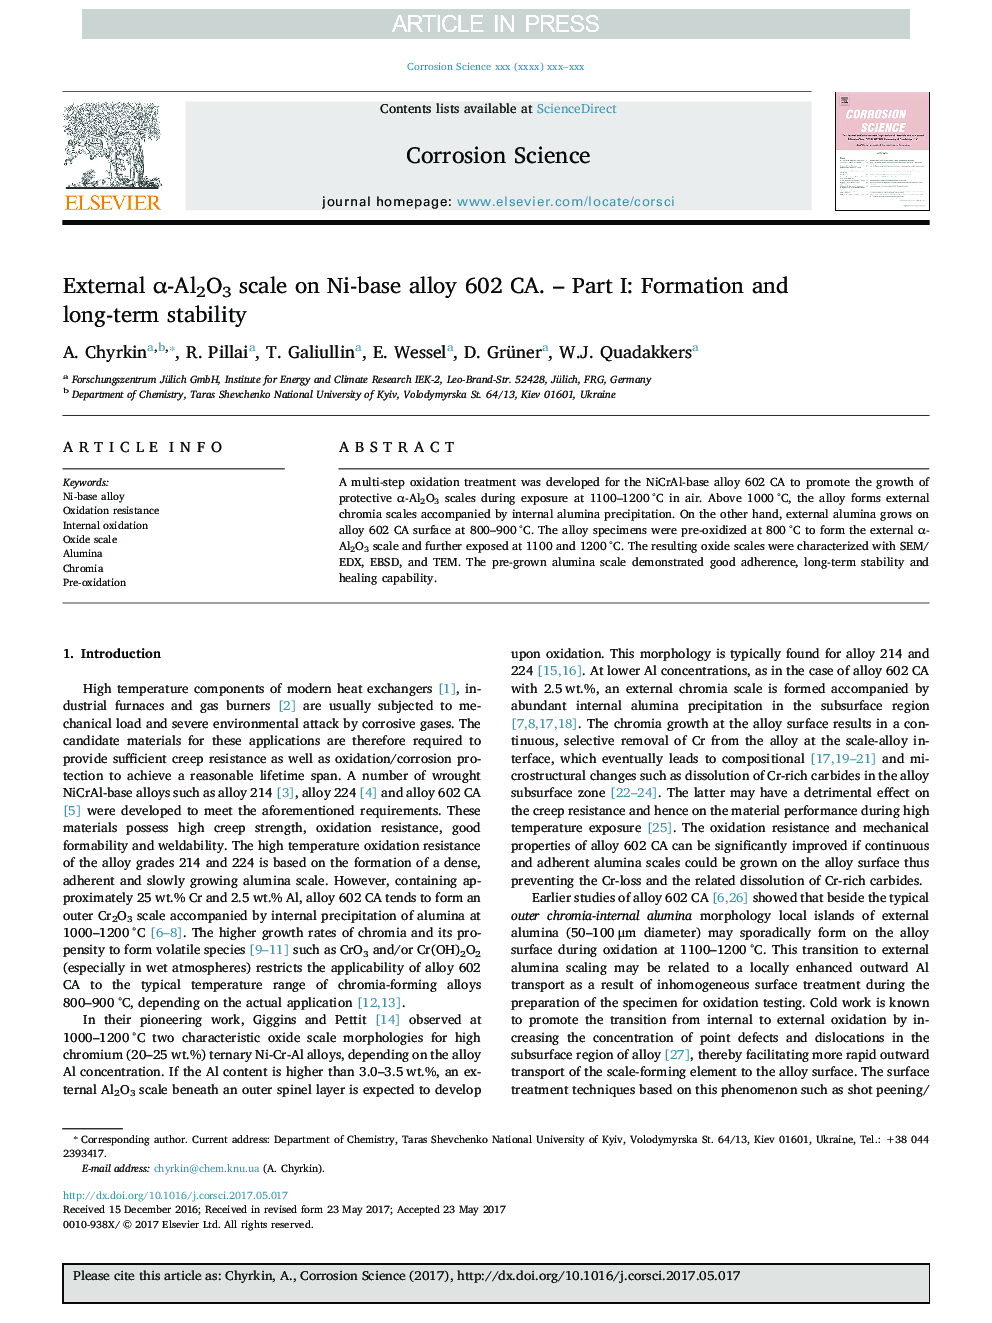 External Î±-Al2O3 scale on Ni-base alloy 602 CA. - Part I: Formation and long-term stability